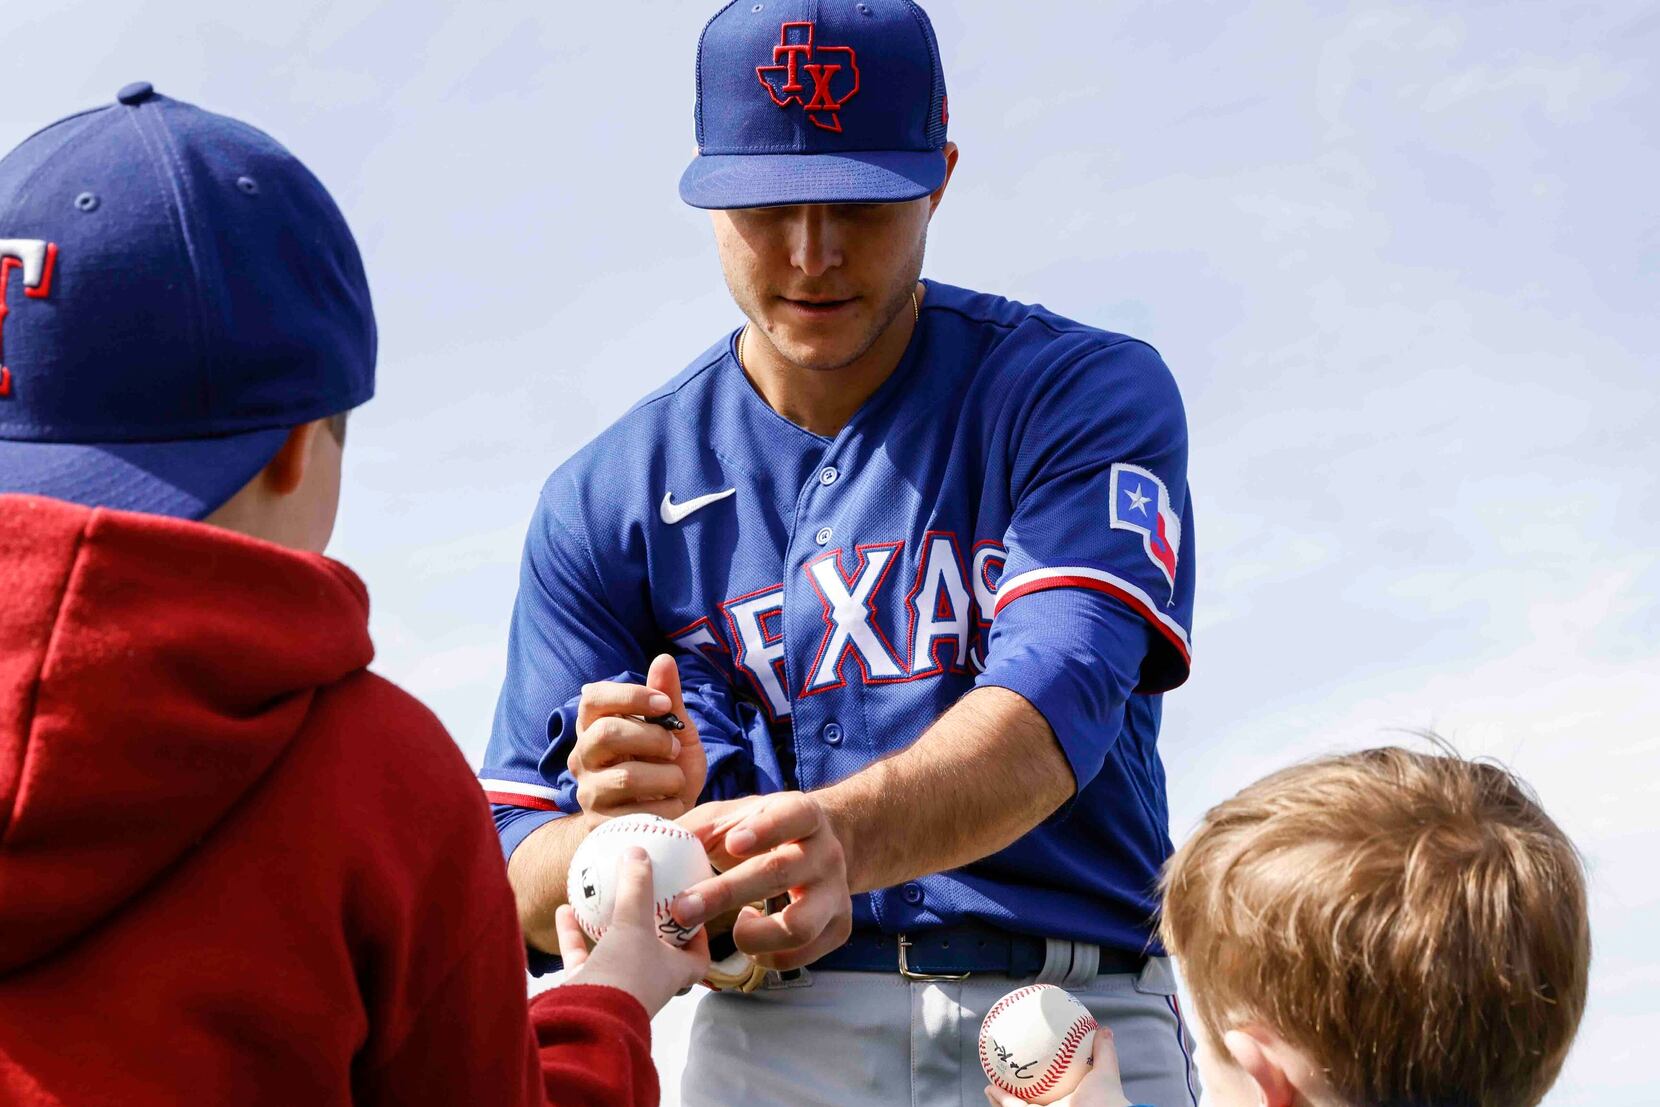 Fans show support for Miller, Rangers during autograph signing at